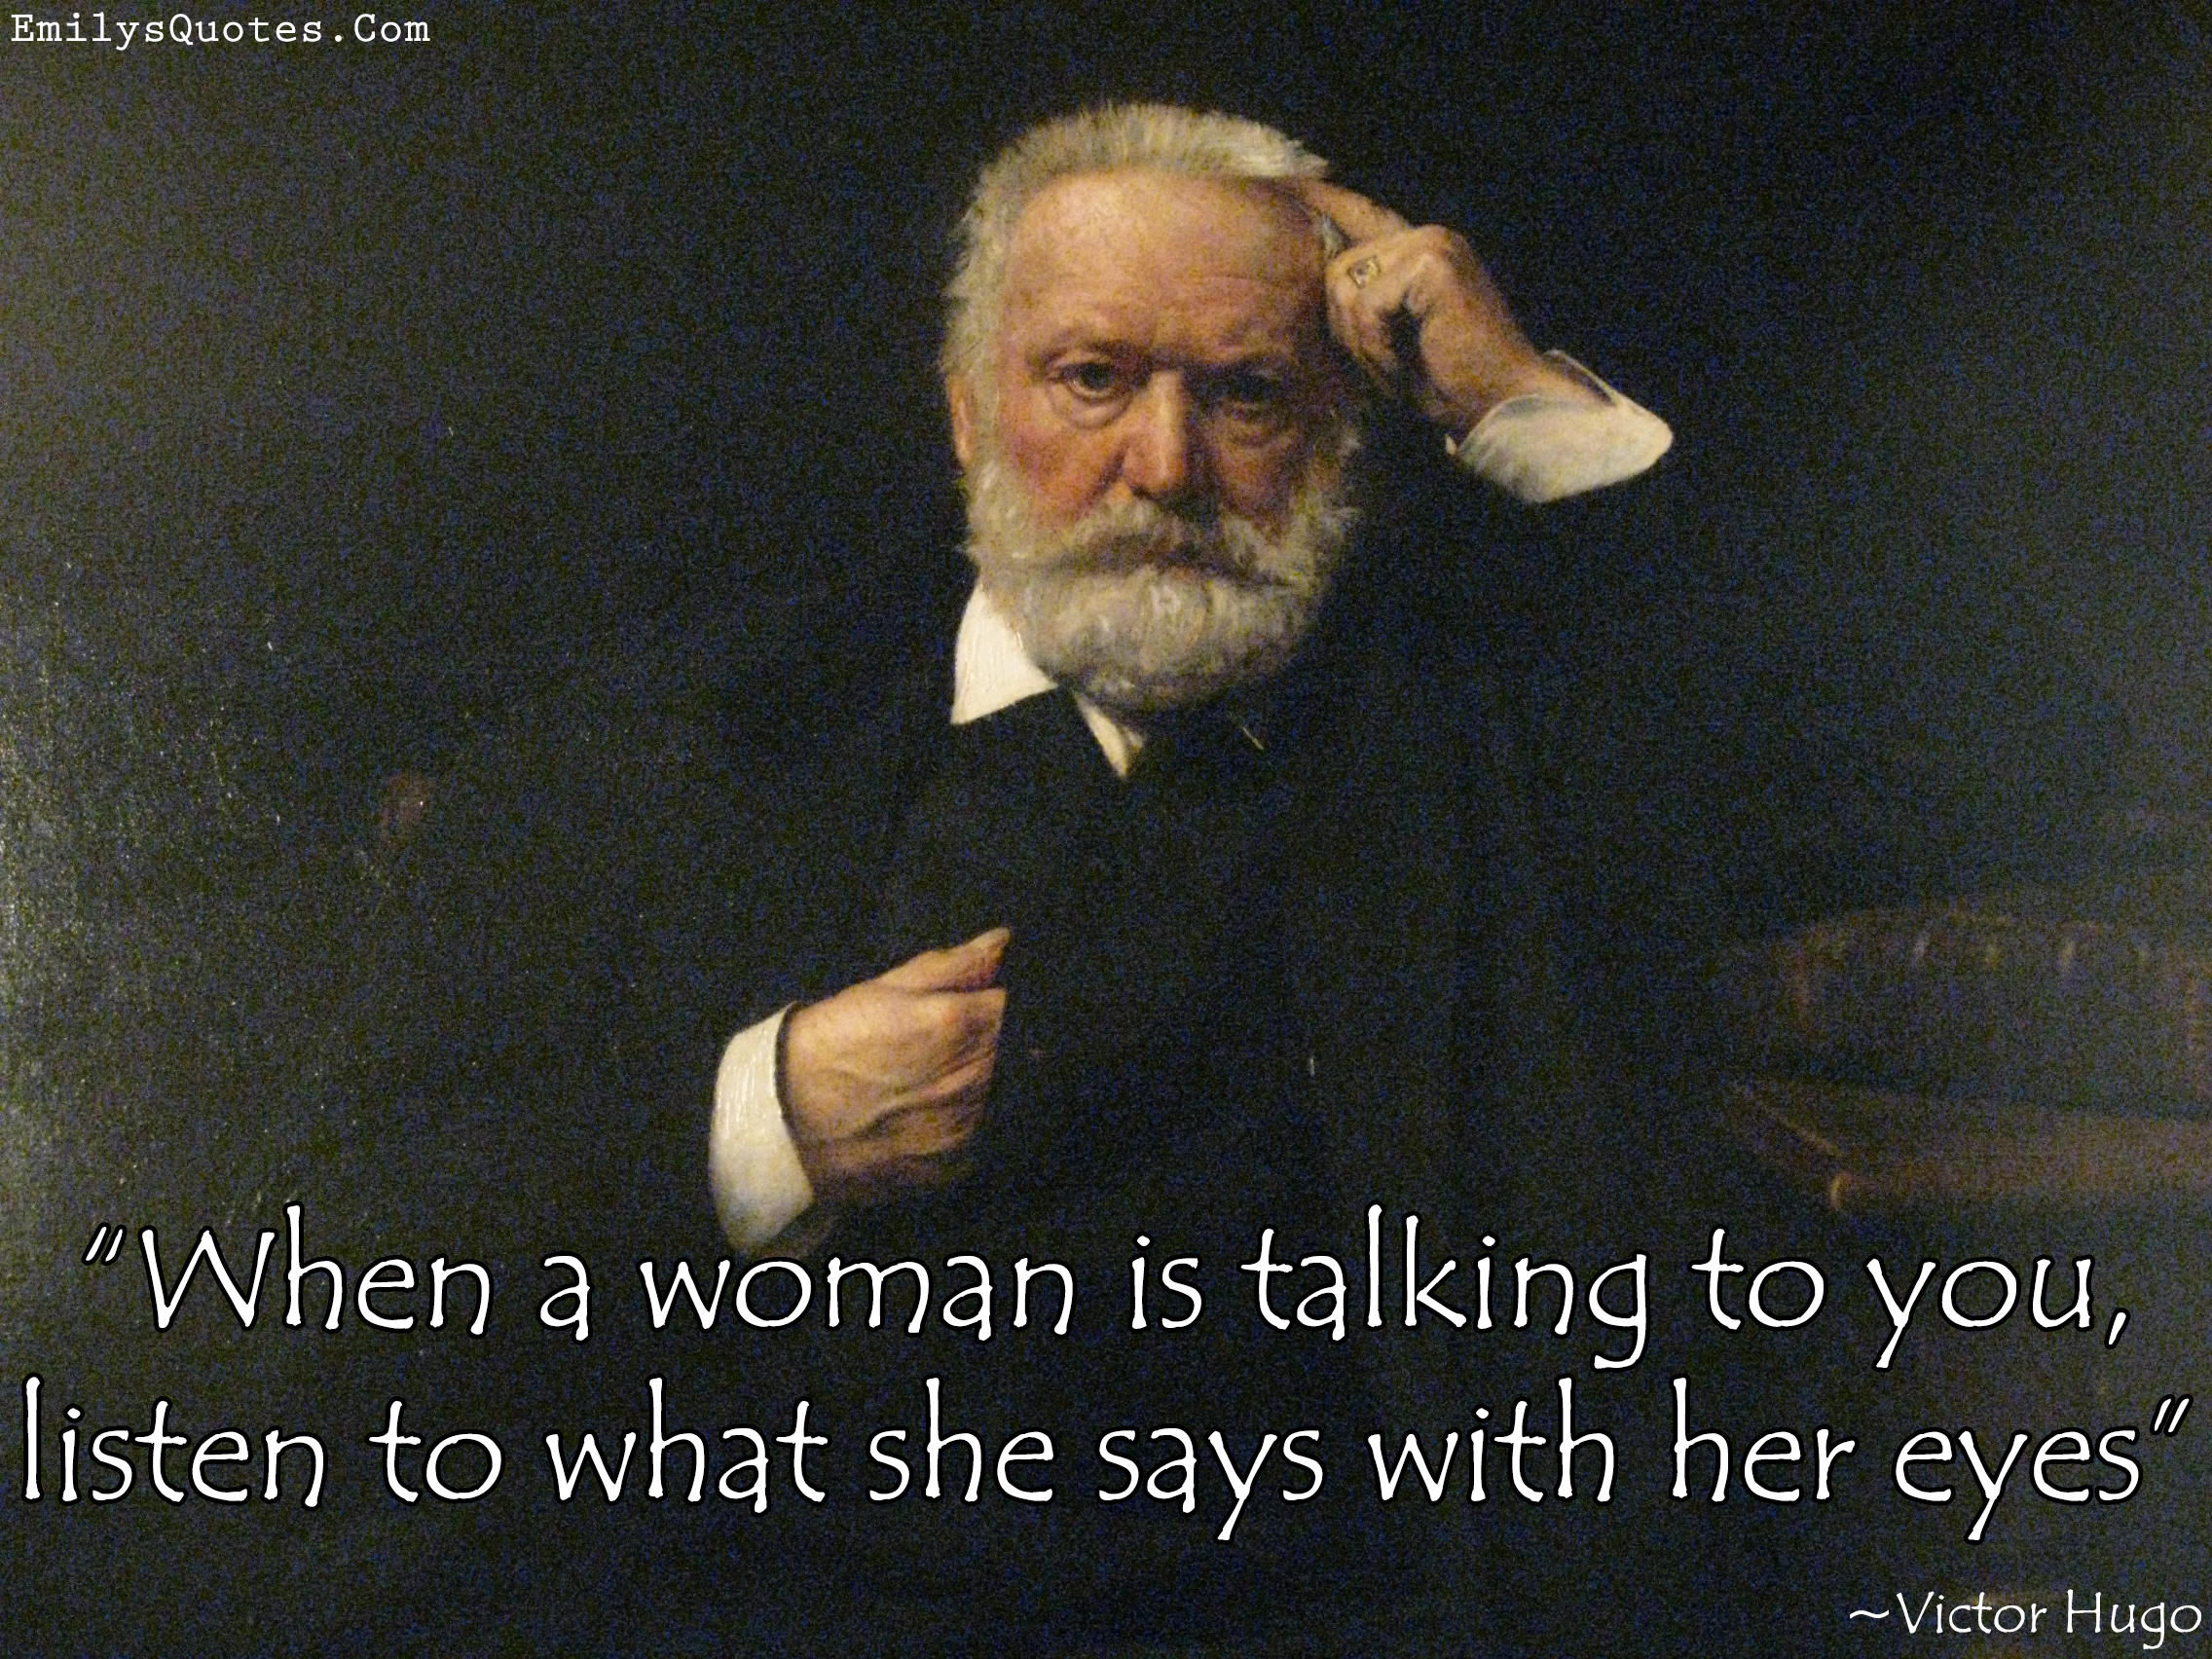 When a woman is talking to you, listen to what she says with her eyes